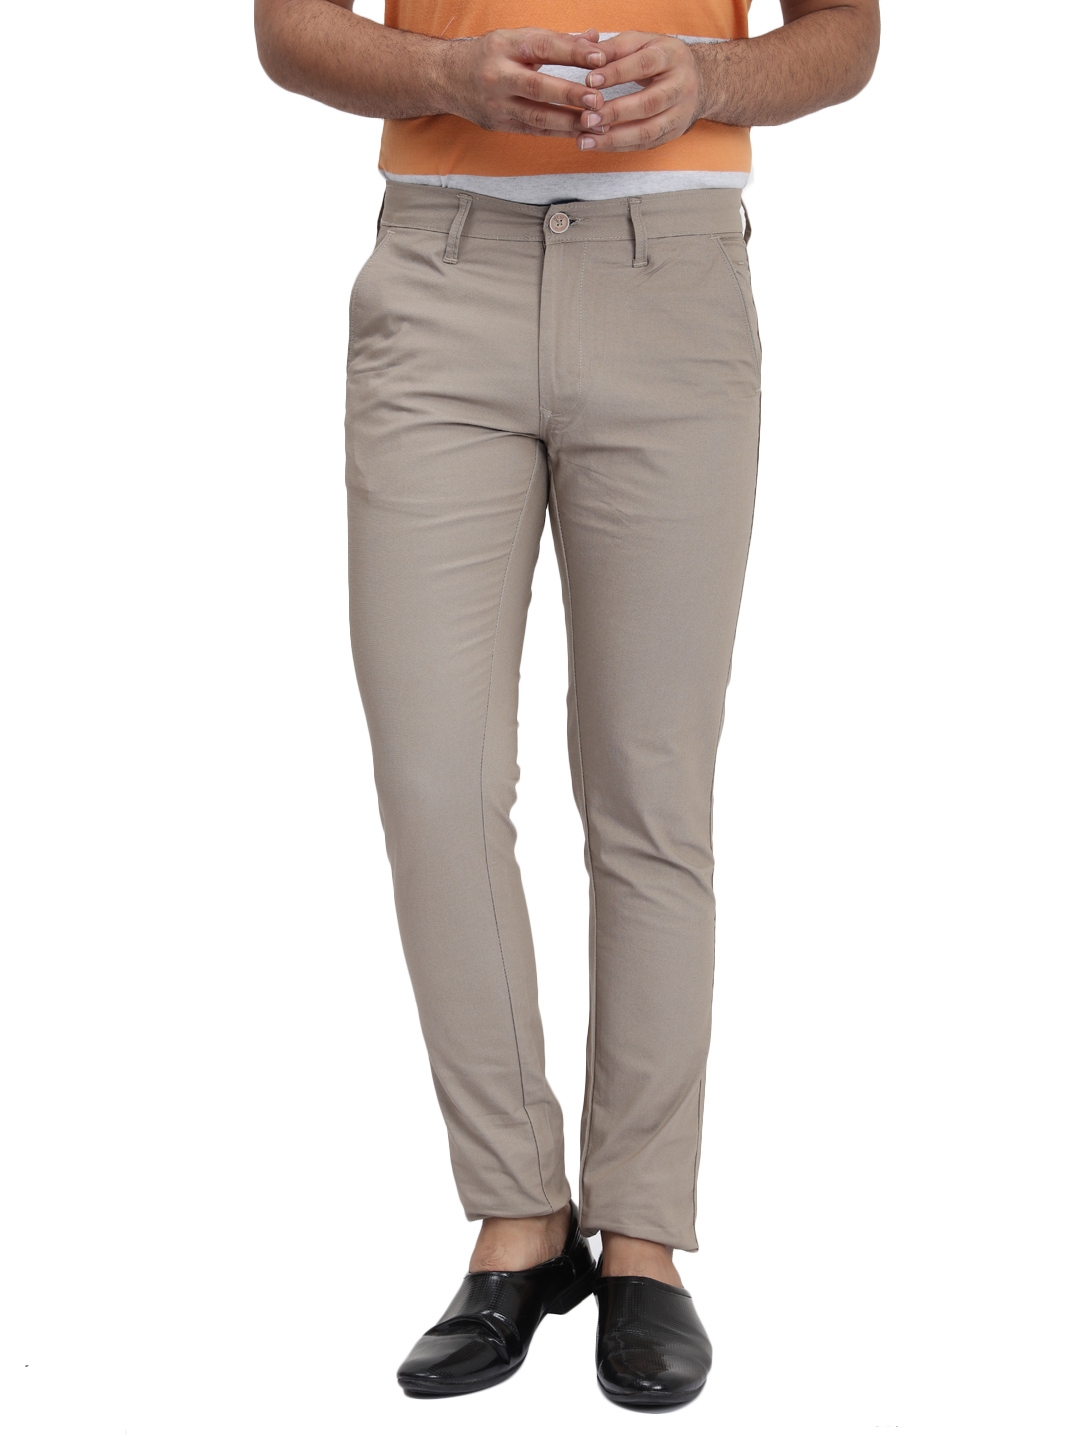 D'cot by Donear Men's Light Grey Cotton Trousers